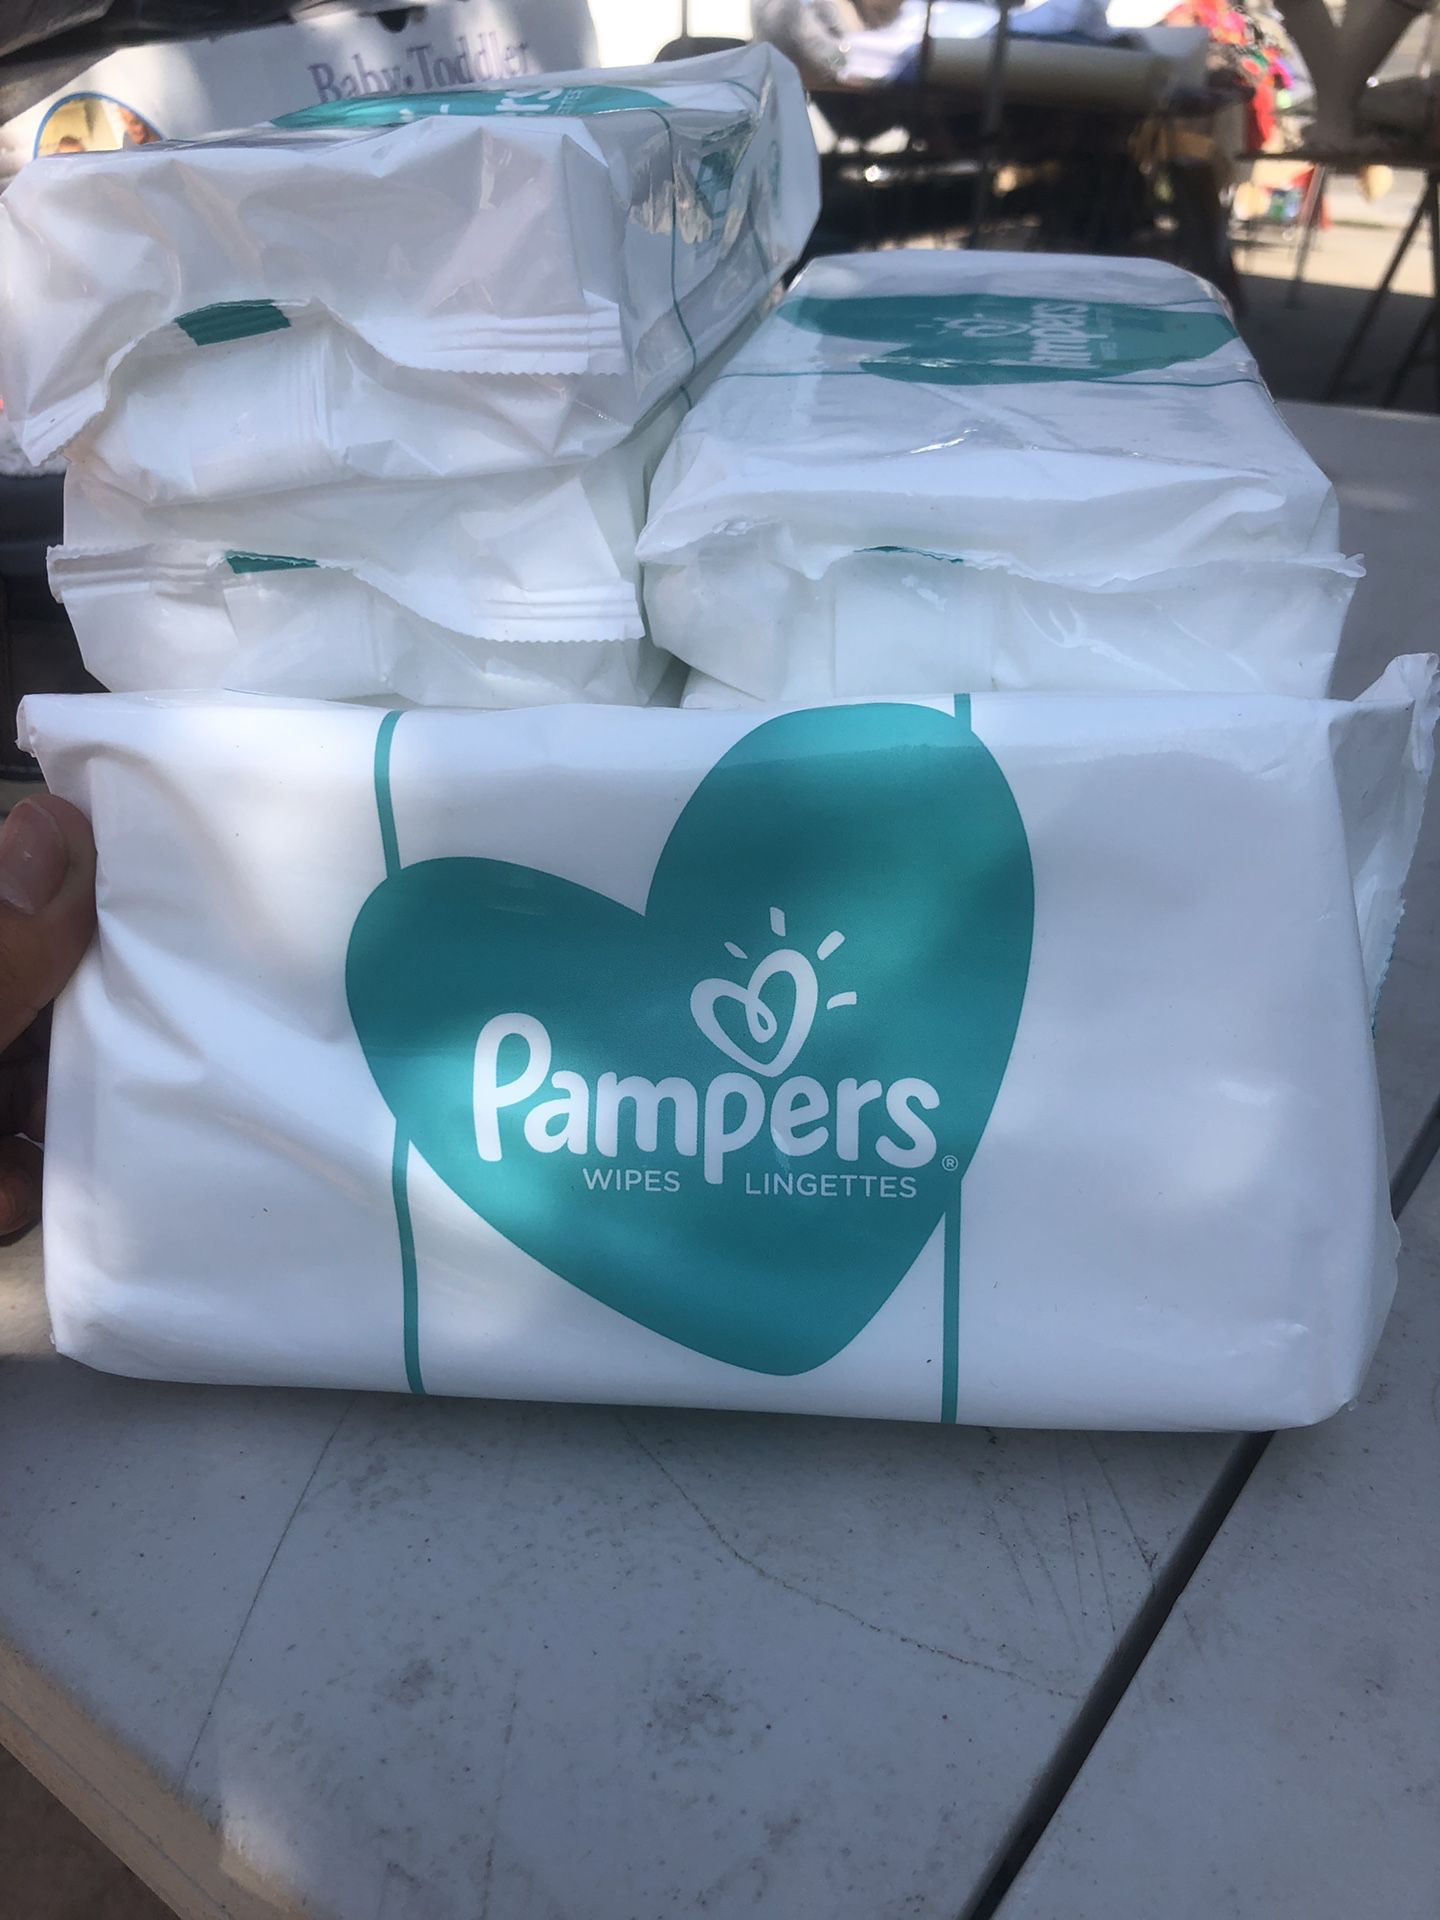 Pampers Wipes Lingettes